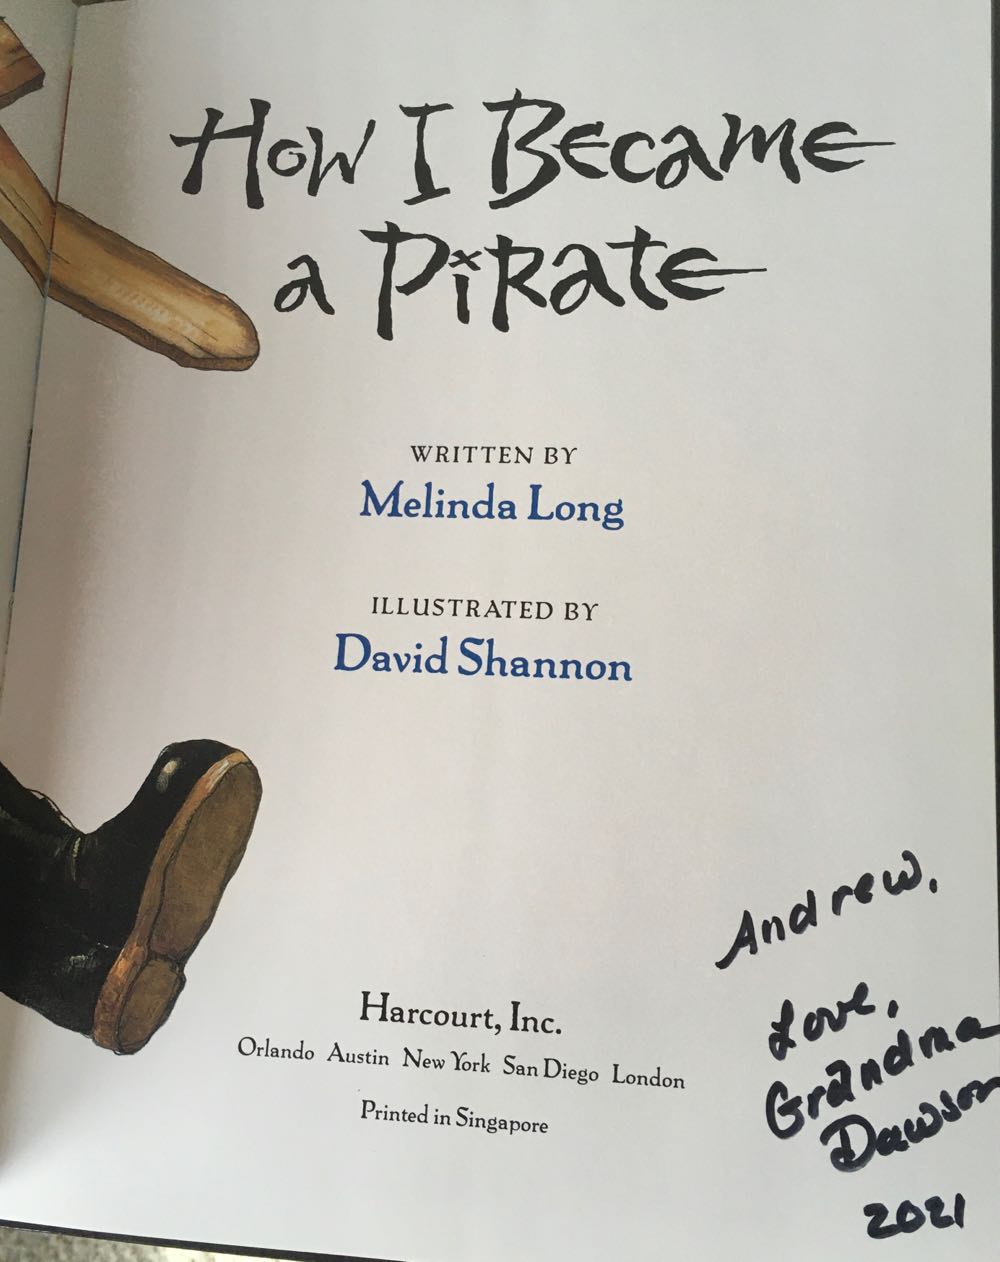 How I Became a Pirate - Melinda Long (Houghton Mifflin Harcourt - Hardcover) book collectible [Barcode 9780152018481] - Main Image 3